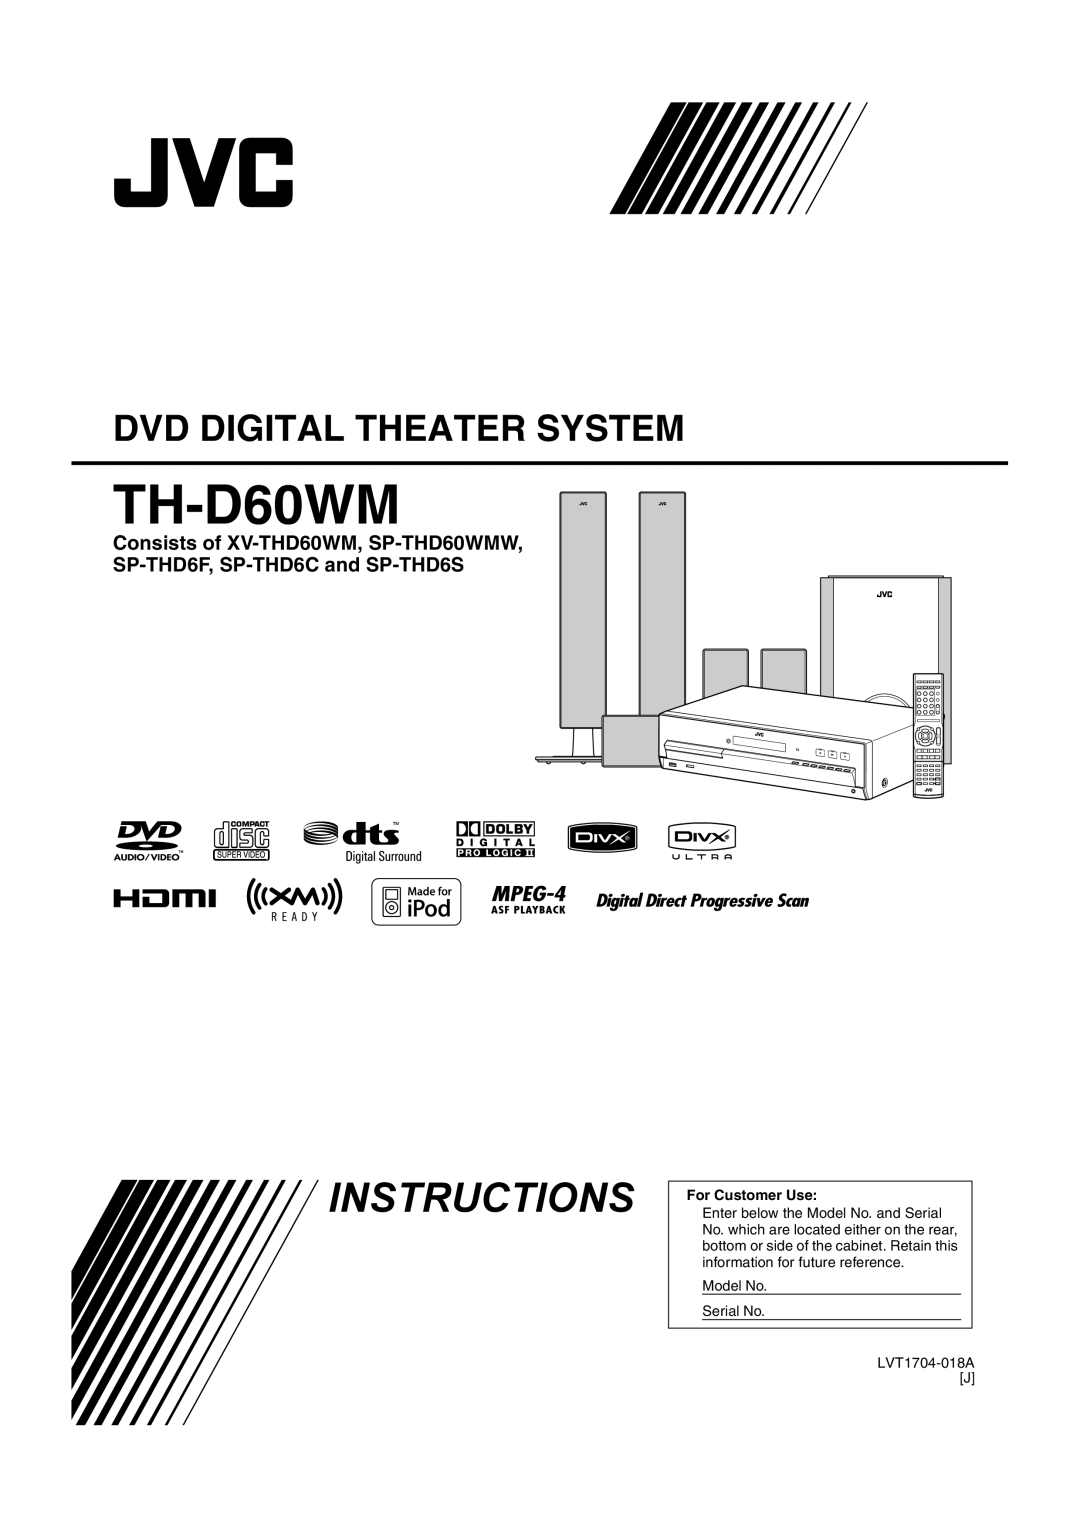 JVC THD60 manual TH-D60WM, Instructions, Dvd Digital Theater System, Enter below the Model No. and Serial, For Customer Use 